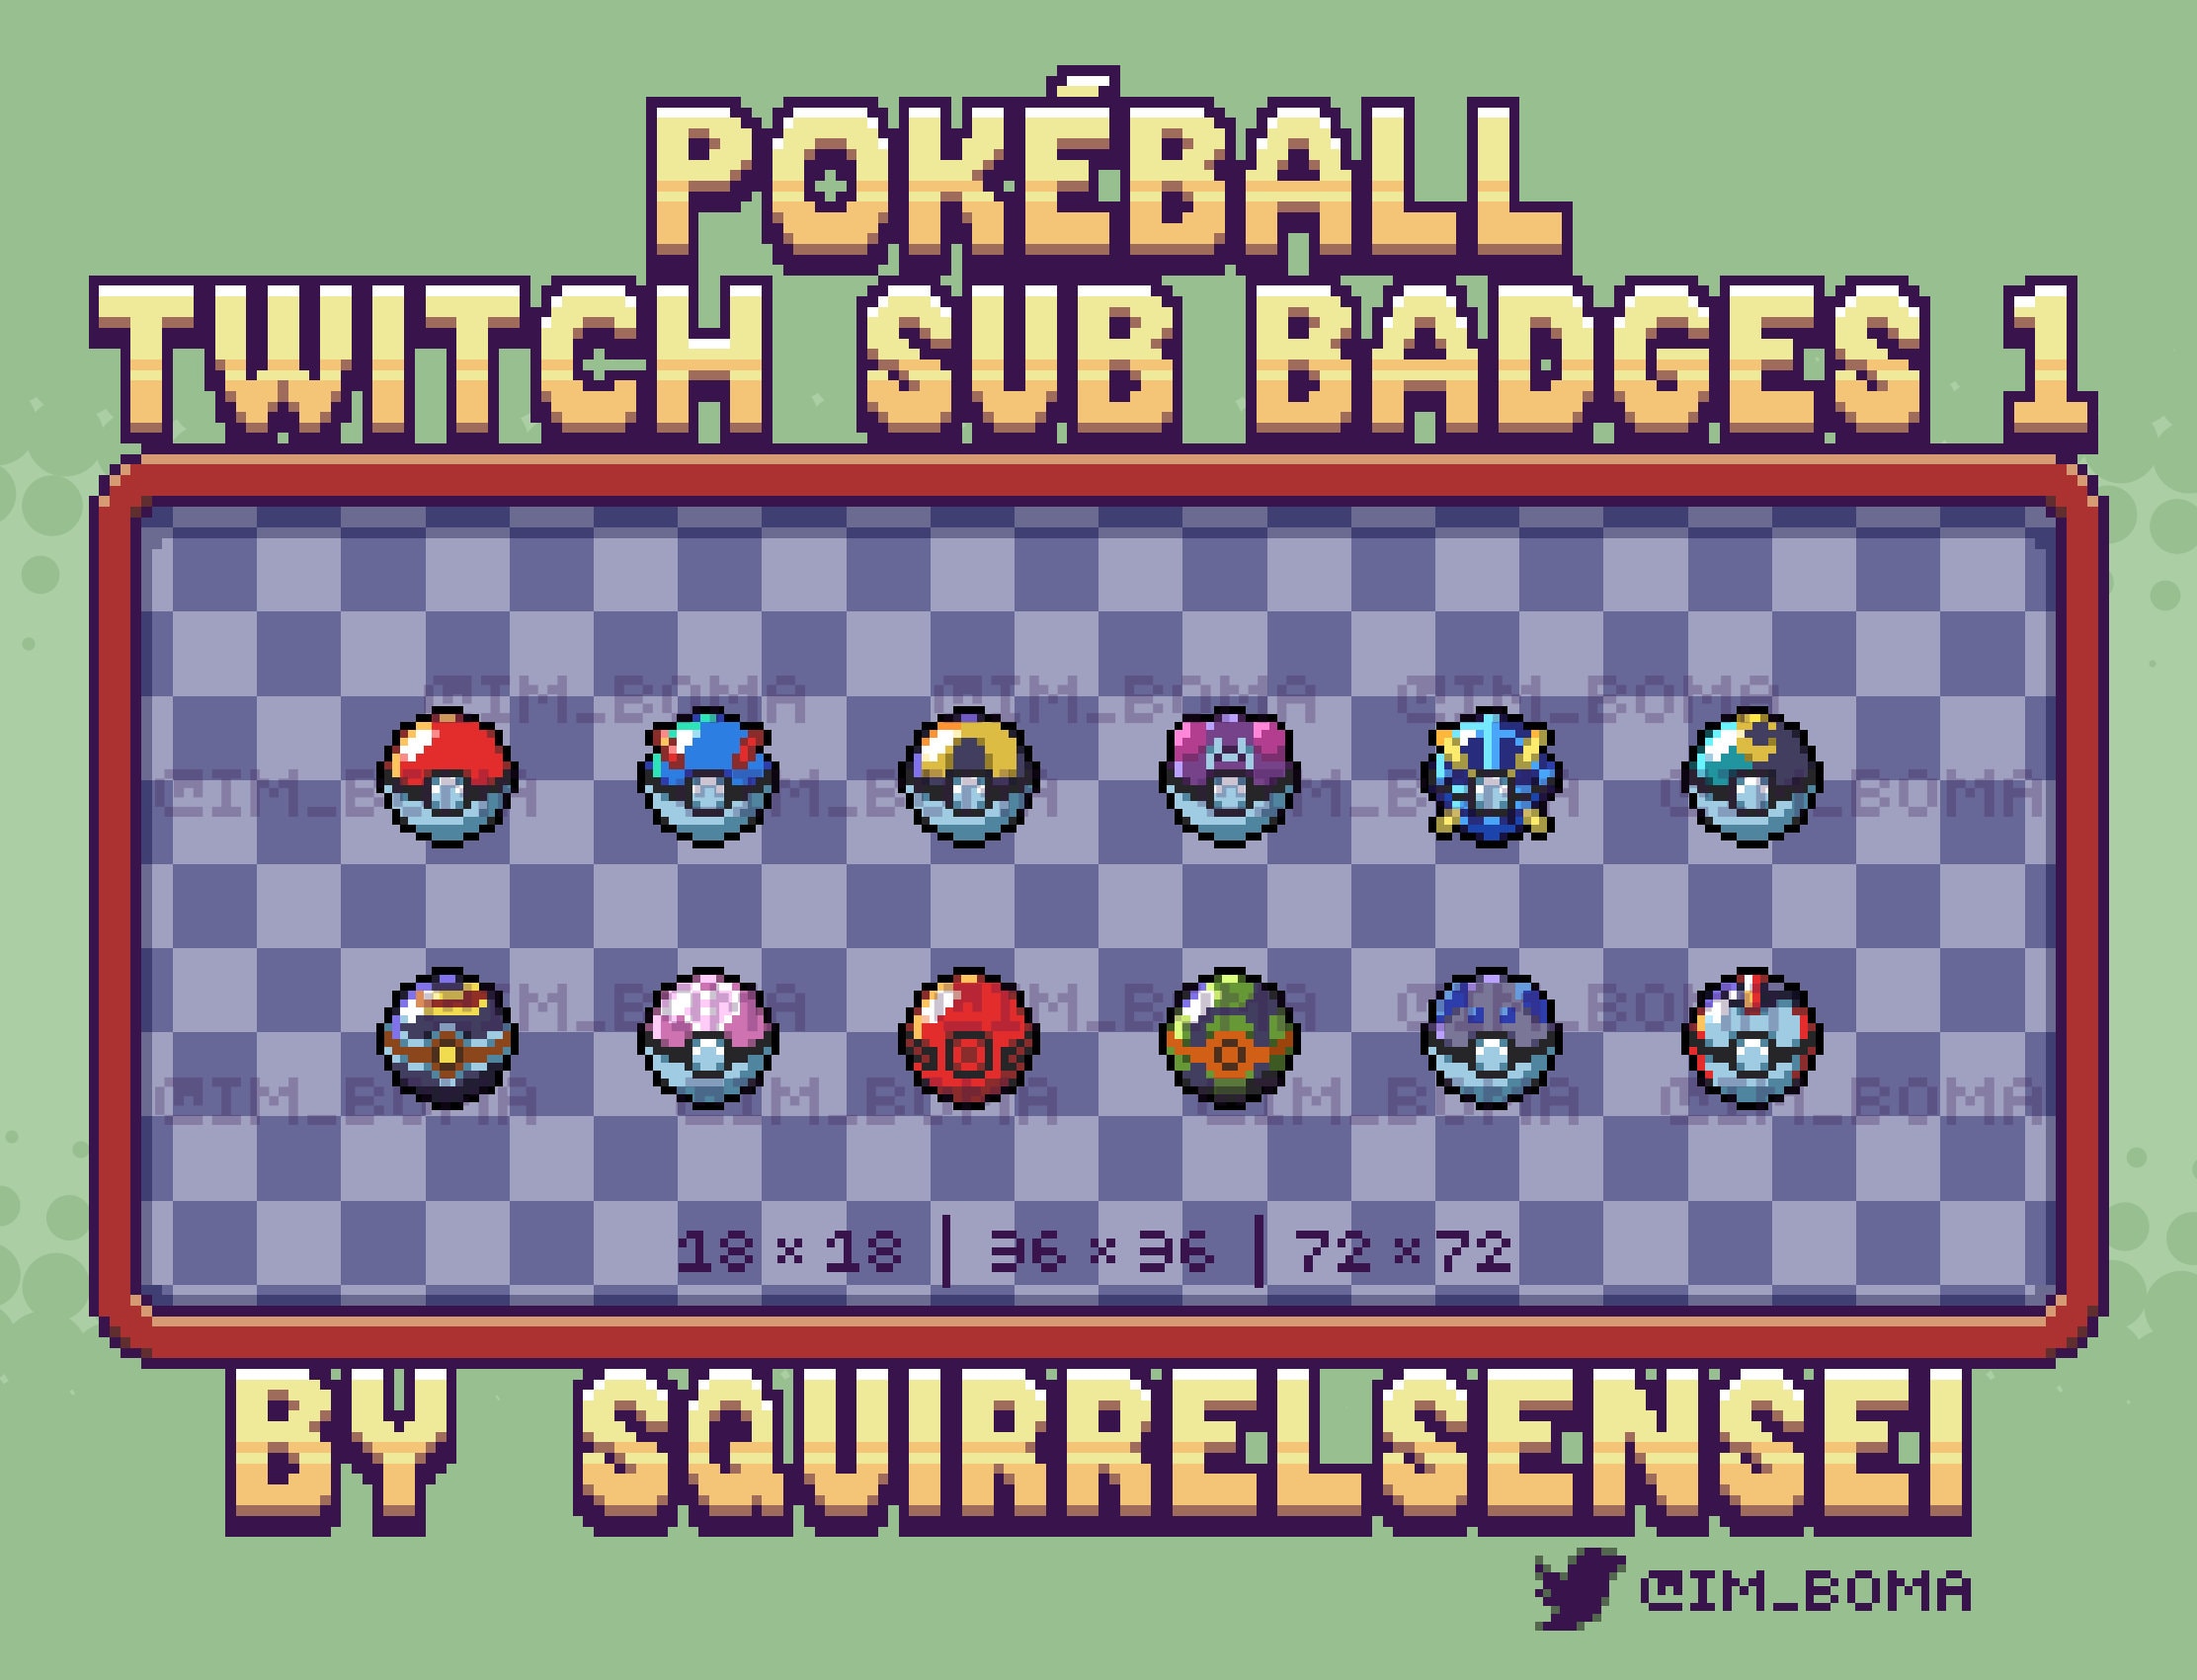 Poke Balls Twitch Sub / Cheer Badges Pixel Art - seaosaur's Ko-fi Shop -  Ko-fi ❤️ Where creators get support from fans through donations,  memberships, shop sales and more! The original 'Buy